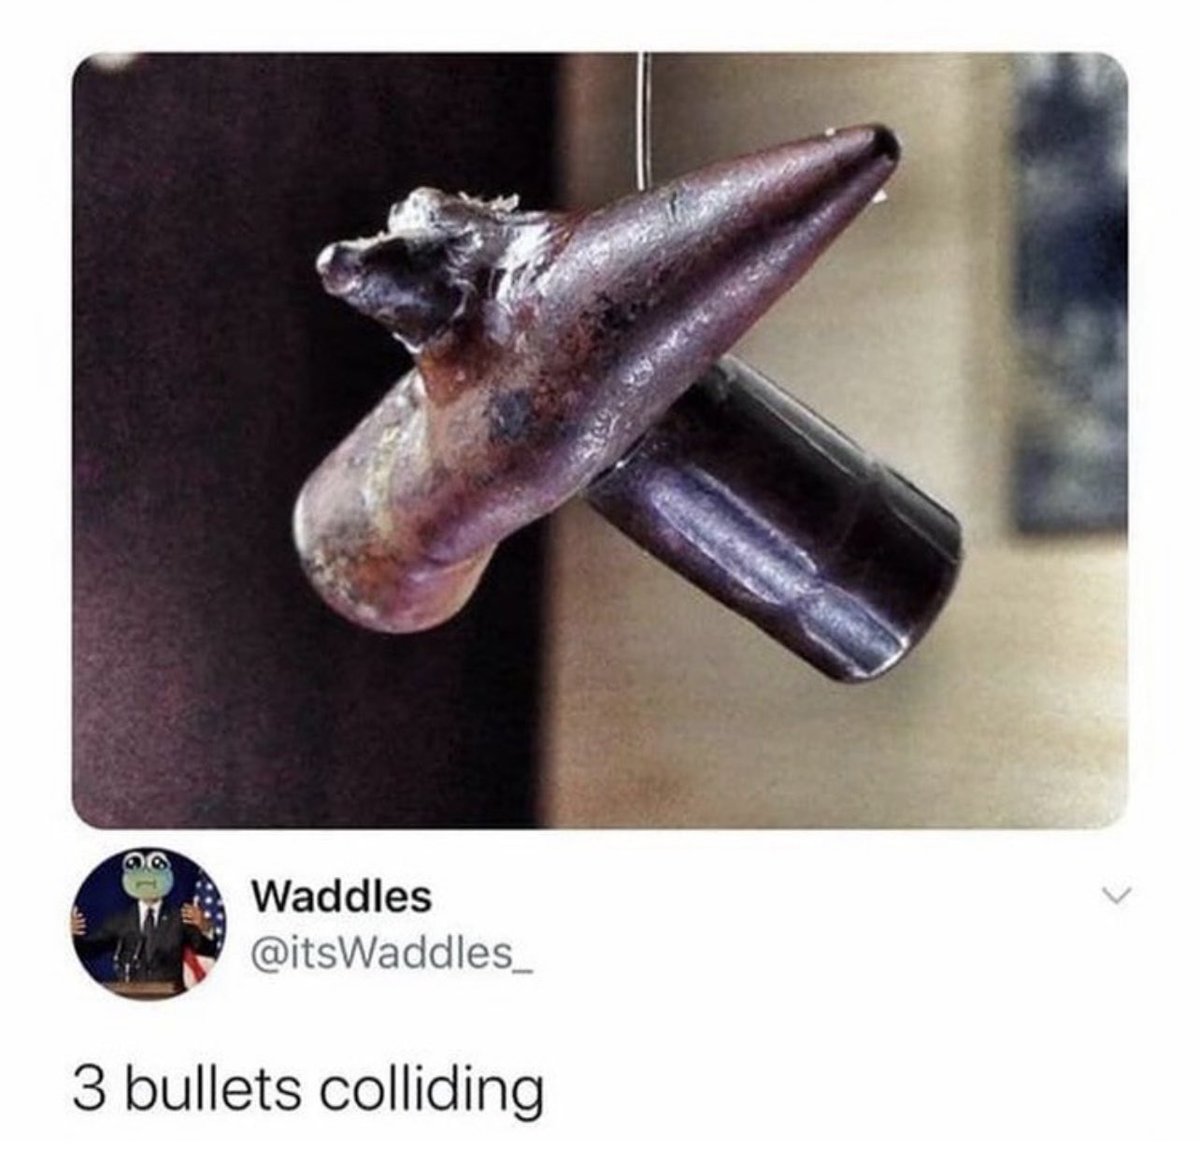 These two bullets collided in the battle of gallipoli in 1915, the chances of this happening are 1 in a billion. Name something more unlikely to happen…